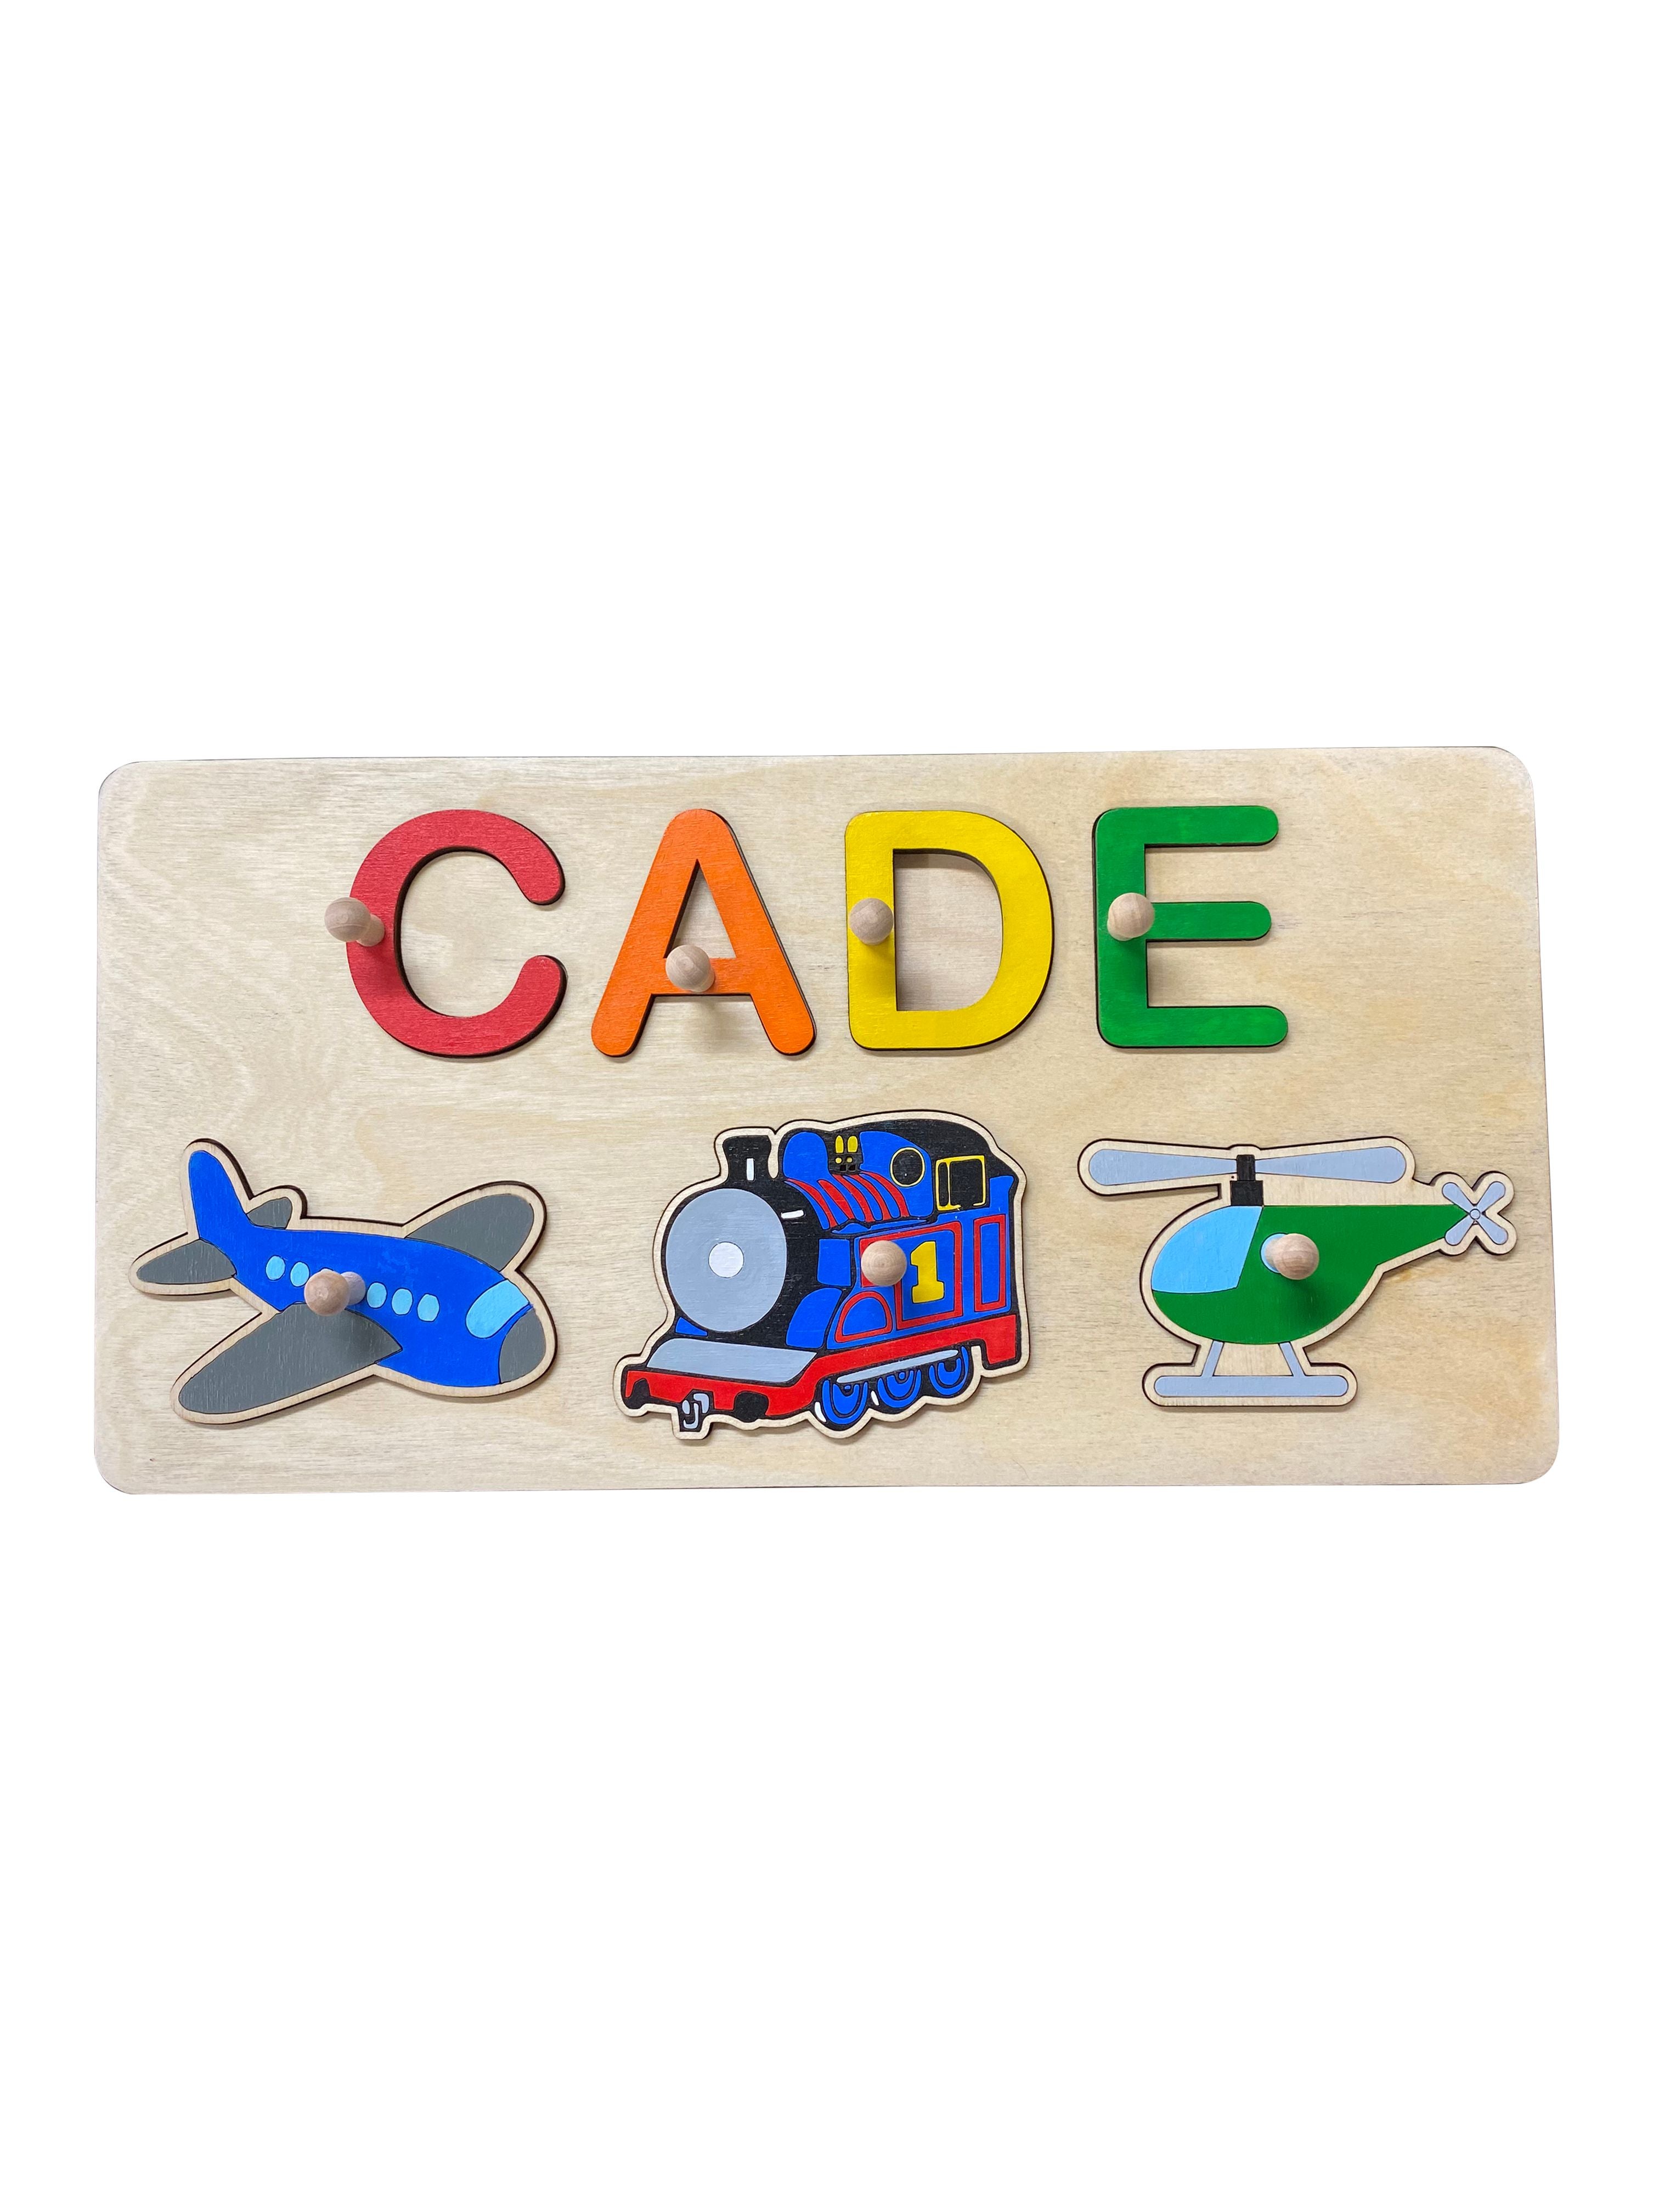 3D Wooden Name Puzzles- Educational Toys with Pegs - BirdsWoodShack